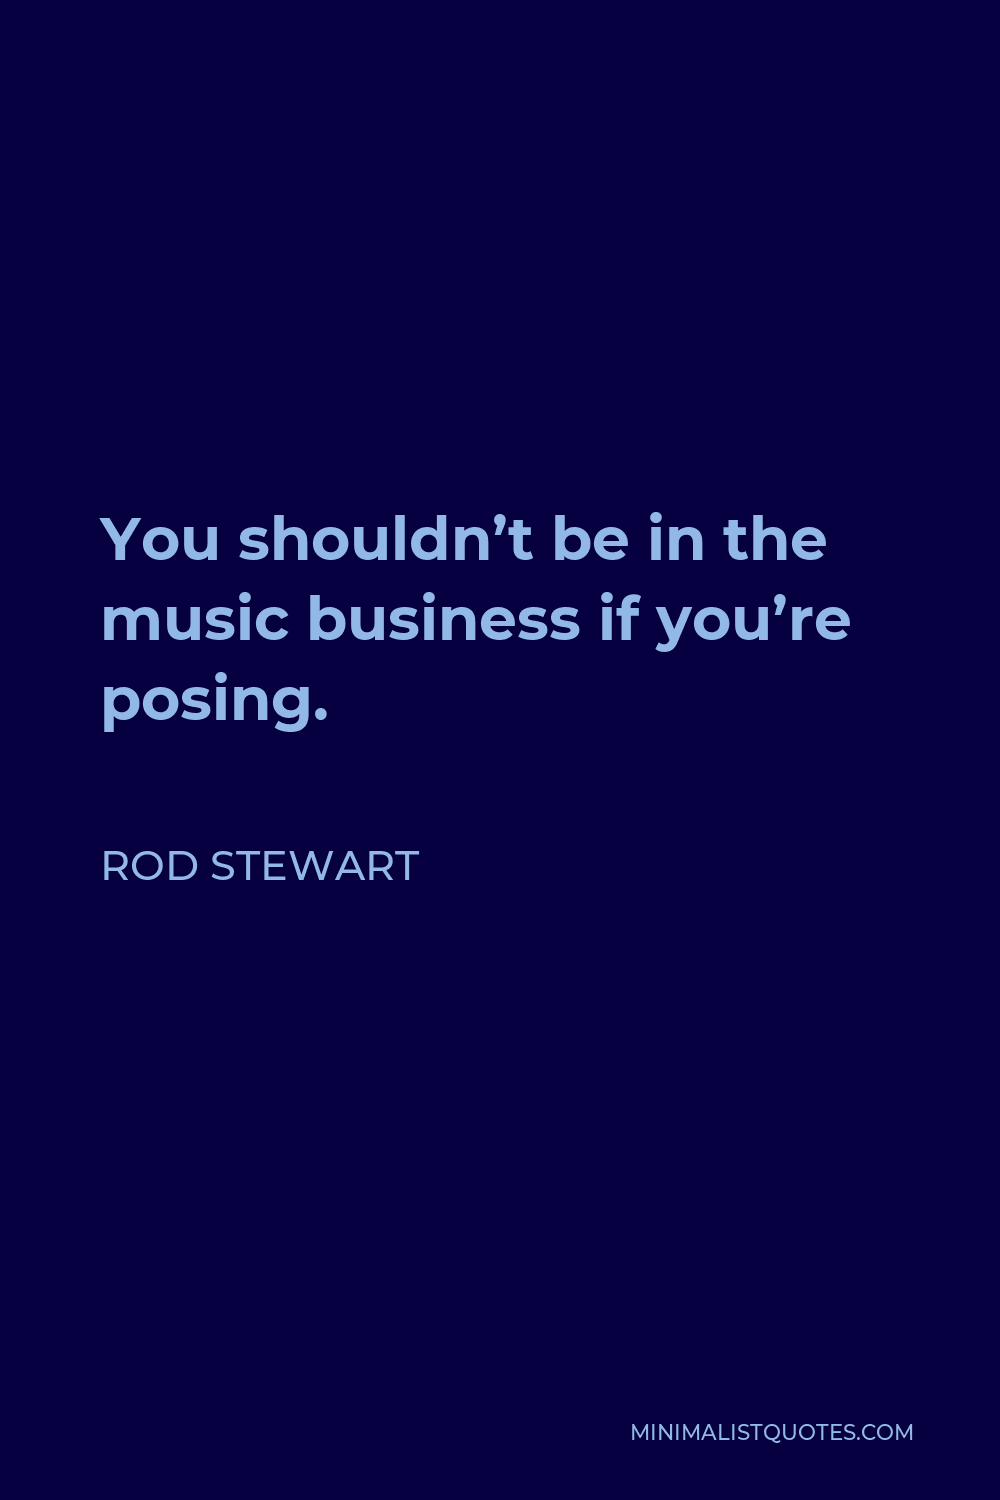 Rod Stewart Quote - You shouldn’t be in the music business if you’re posing.